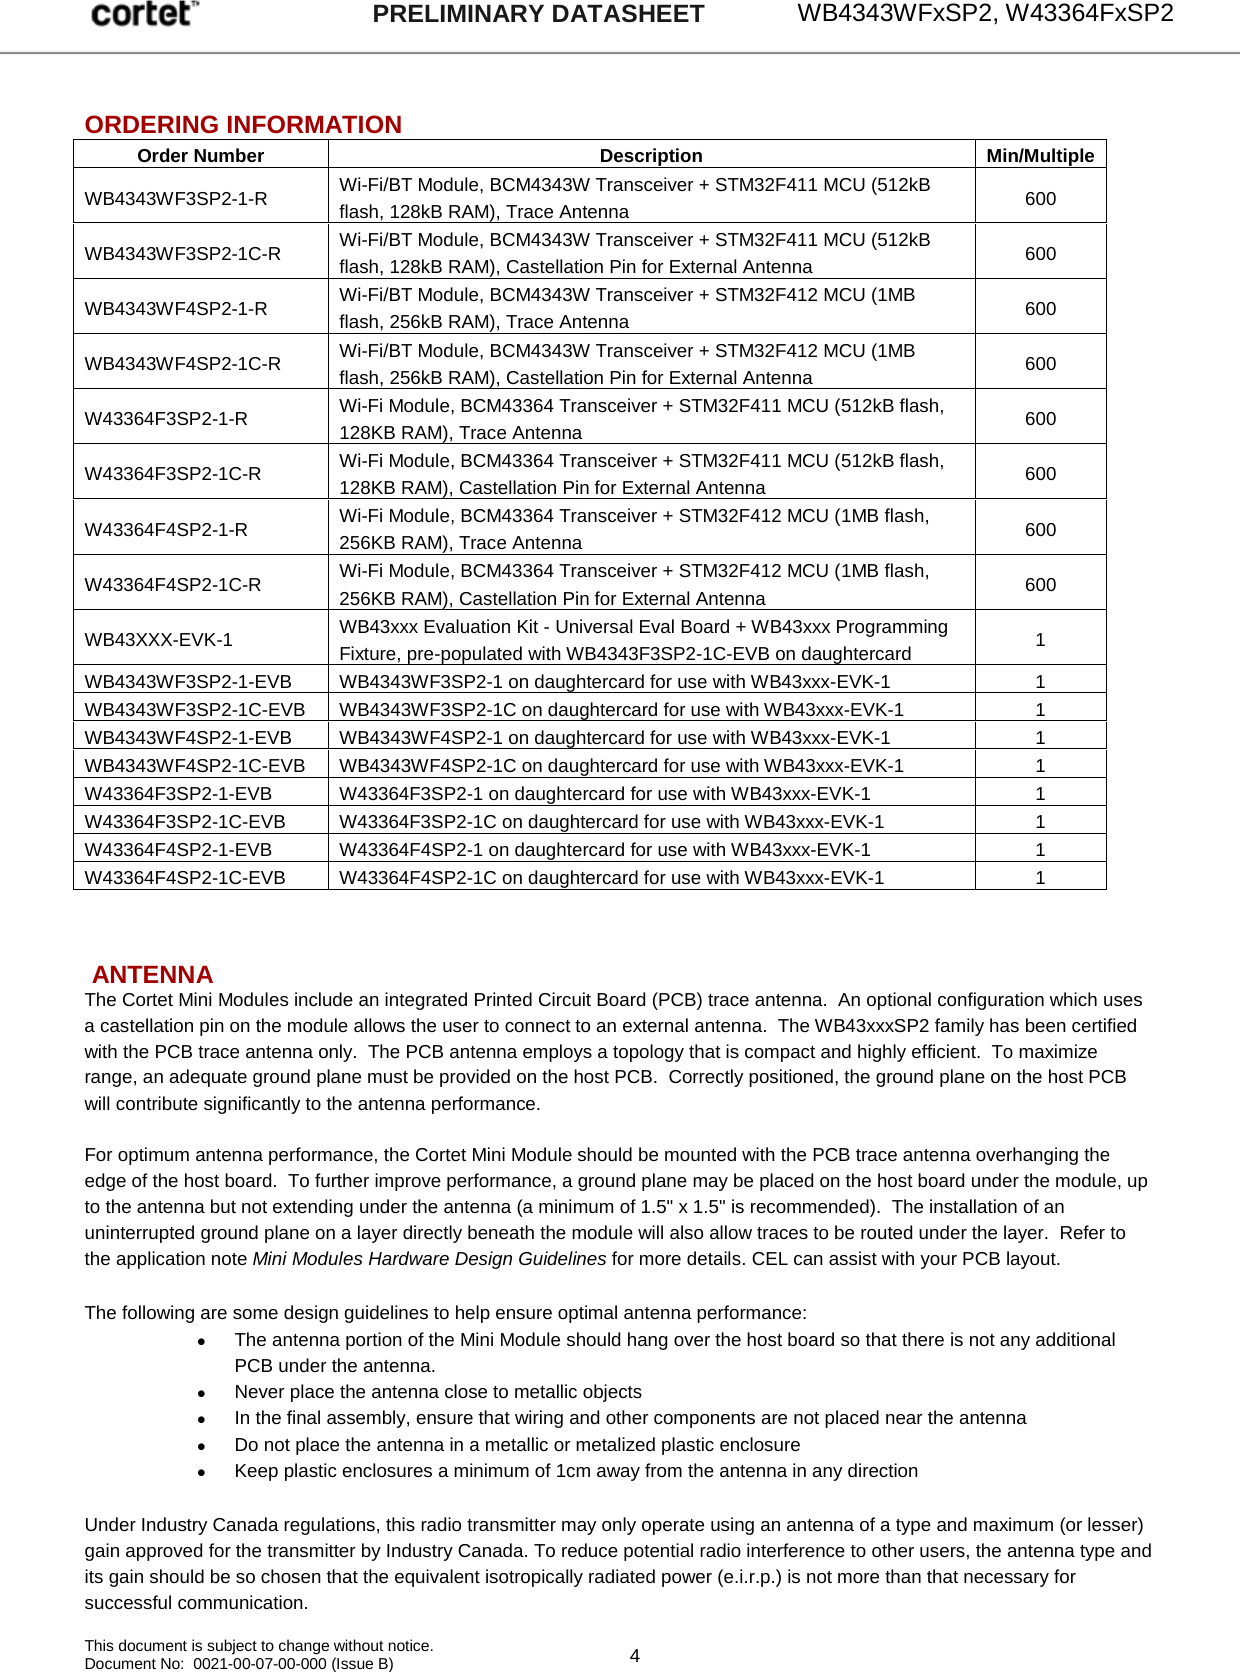     WB4343WFxSP2, W43364FxSP2   This document is subject to change without notice. Document No:  0021-00-07-00-000 (Issue B)  4 PRELIMINARY DATASHEET  ORDERING INFORMATION Order Number Description Min/Multiple WB4343WF3SP2-1-R  Wi-Fi/BT Module, BCM4343W Transceiver + STM32F411 MCU (512kB flash, 128kB RAM), Trace Antenna 600 WB4343WF3SP2-1C-R  Wi-Fi/BT Module, BCM4343W Transceiver + STM32F411 MCU (512kB flash, 128kB RAM), Castellation Pin for External Antenna 600 WB4343WF4SP2-1-R  Wi-Fi/BT Module, BCM4343W Transceiver + STM32F412 MCU (1MB flash, 256kB RAM), Trace Antenna 600 WB4343WF4SP2-1C-R  Wi-Fi/BT Module, BCM4343W Transceiver + STM32F412 MCU (1MB flash, 256kB RAM), Castellation Pin for External Antenna 600 W43364F3SP2-1-R  Wi-Fi Module, BCM43364 Transceiver + STM32F411 MCU (512kB flash, 128KB RAM), Trace Antenna 600 W43364F3SP2-1C-R  Wi-Fi Module, BCM43364 Transceiver + STM32F411 MCU (512kB flash, 128KB RAM), Castellation Pin for External Antenna 600 W43364F4SP2-1-R  Wi-Fi Module, BCM43364 Transceiver + STM32F412 MCU (1MB flash, 256KB RAM), Trace Antenna 600 W43364F4SP2-1C-R  Wi-Fi Module, BCM43364 Transceiver + STM32F412 MCU (1MB flash, 256KB RAM), Castellation Pin for External Antenna 600 WB43XXX-EVK-1  WB43xxx Evaluation Kit - Universal Eval Board + WB43xxx Programming Fixture, pre-populated with WB4343F3SP2-1C-EVB on daughtercard 1 WB4343WF3SP2-1-EVB WB4343WF3SP2-1 on daughtercard for use with WB43xxx-EVK-1 1 WB4343WF3SP2-1C-EVB WB4343WF3SP2-1C on daughtercard for use with WB43xxx-EVK-1 1 WB4343WF4SP2-1-EVB WB4343WF4SP2-1 on daughtercard for use with WB43xxx-EVK-1 1 WB4343WF4SP2-1C-EVB WB4343WF4SP2-1C on daughtercard for use with WB43xxx-EVK-1 1 W43364F3SP2-1-EVB W43364F3SP2-1 on daughtercard for use with WB43xxx-EVK-1 1 W43364F3SP2-1C-EVB W43364F3SP2-1C on daughtercard for use with WB43xxx-EVK-1 1 W43364F4SP2-1-EVB W43364F4SP2-1 on daughtercard for use with WB43xxx-EVK-1 1 W43364F4SP2-1C-EVB W43364F4SP2-1C on daughtercard for use with WB43xxx-EVK-1 1    ANTENNA The Cortet Mini Modules include an integrated Printed Circuit Board (PCB) trace antenna.  An optional configuration which uses a castellation pin on the module allows the user to connect to an external antenna.  The WB43xxxSP2 family has been certified with the PCB trace antenna only.  The PCB antenna employs a topology that is compact and highly efficient.  To maximize range, an adequate ground plane must be provided on the host PCB.  Correctly positioned, the ground plane on the host PCB will contribute significantly to the antenna performance.  For optimum antenna performance, the Cortet Mini Module should be mounted with the PCB trace antenna overhanging the edge of the host board.  To further improve performance, a ground plane may be placed on the host board under the module, up to the antenna but not extending under the antenna (a minimum of 1.5&quot; x 1.5&quot; is recommended).  The installation of an uninterrupted ground plane on a layer directly beneath the module will also allow traces to be routed under the layer.  Refer to the application note Mini Modules Hardware Design Guidelines for more details. CEL can assist with your PCB layout.  The following are some design guidelines to help ensure optimal antenna performance: • The antenna portion of the Mini Module should hang over the host board so that there is not any additional PCB under the antenna. • Never place the antenna close to metallic objects • In the final assembly, ensure that wiring and other components are not placed near the antenna • Do not place the antenna in a metallic or metalized plastic enclosure • Keep plastic enclosures a minimum of 1cm away from the antenna in any direction  Under Industry Canada regulations, this radio transmitter may only operate using an antenna of a type and maximum (or lesser) gain approved for the transmitter by Industry Canada. To reduce potential radio interference to other users, the antenna type and its gain should be so chosen that the equivalent isotropically radiated power (e.i.r.p.) is not more than that necessary for successful communication.   